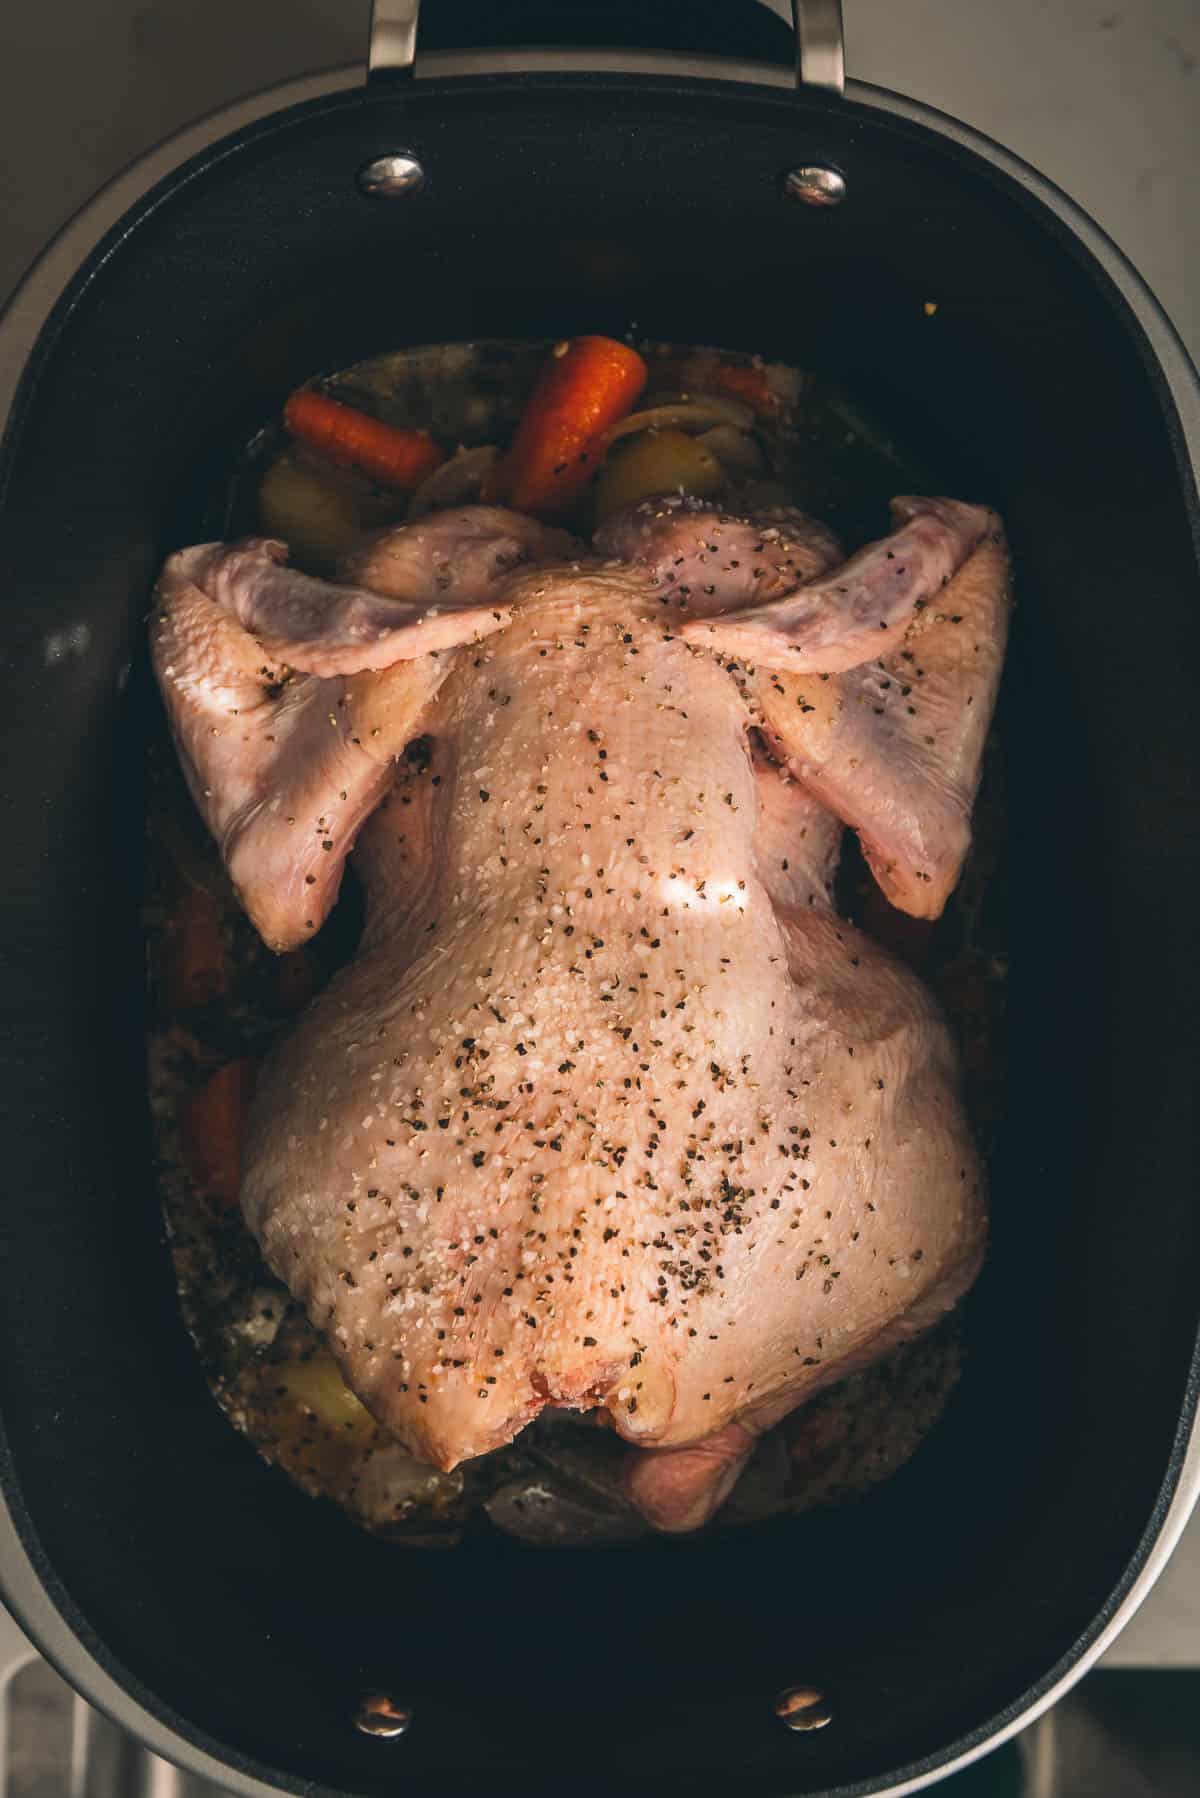 A whole chicken is being nestled into a slow cooker over veggies.